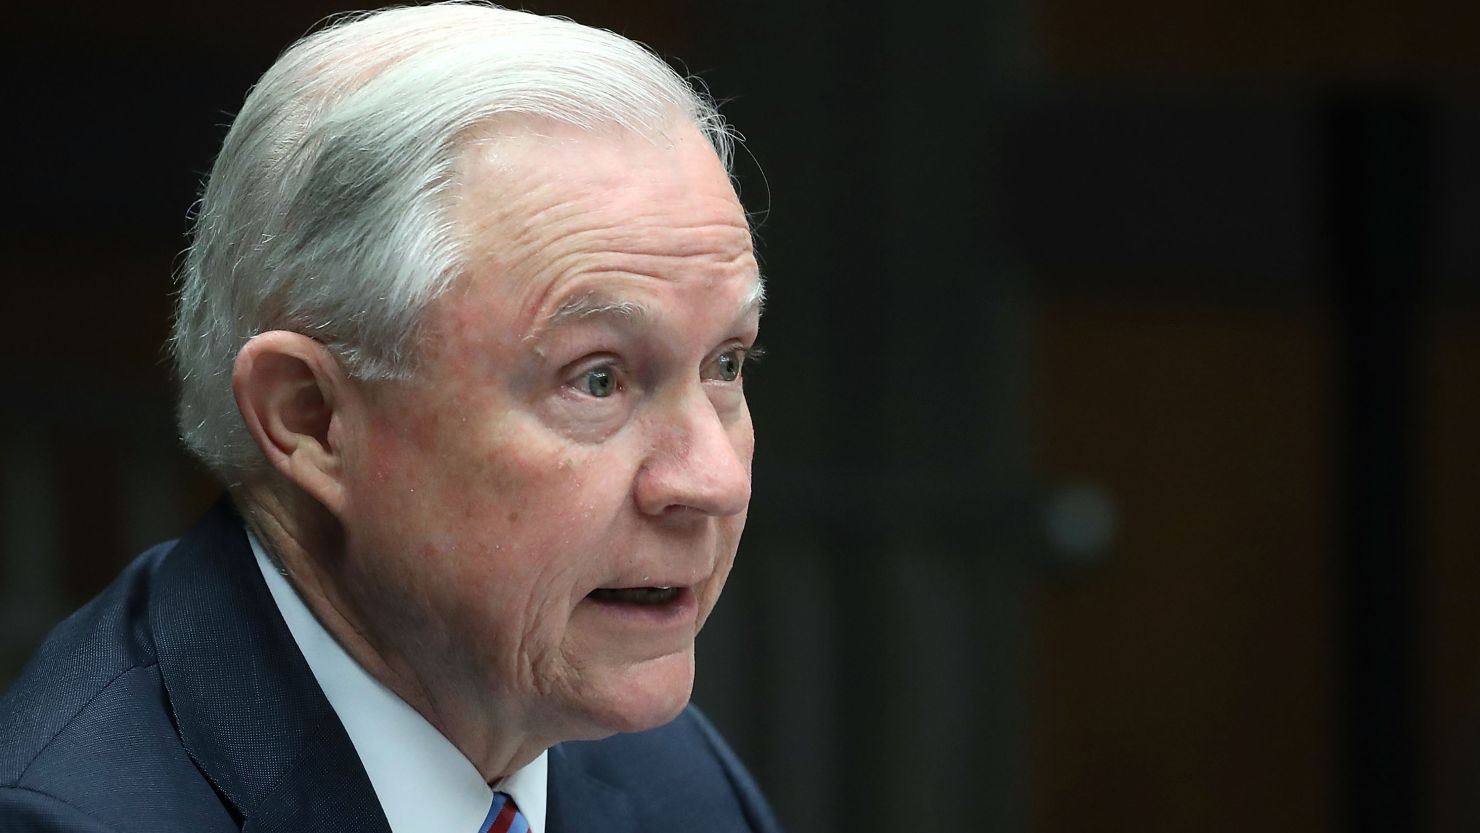 Attorney General Jeff Sessions speaks about organized gang violence at the Department of Justice, April 18 in Washington. Sessions spoke during a meeting of the Attorney General's Organized Crime Council and Organized Crime Drug Enforcement Task Forces.  (Photo by Mark Wilson/Getty Images)